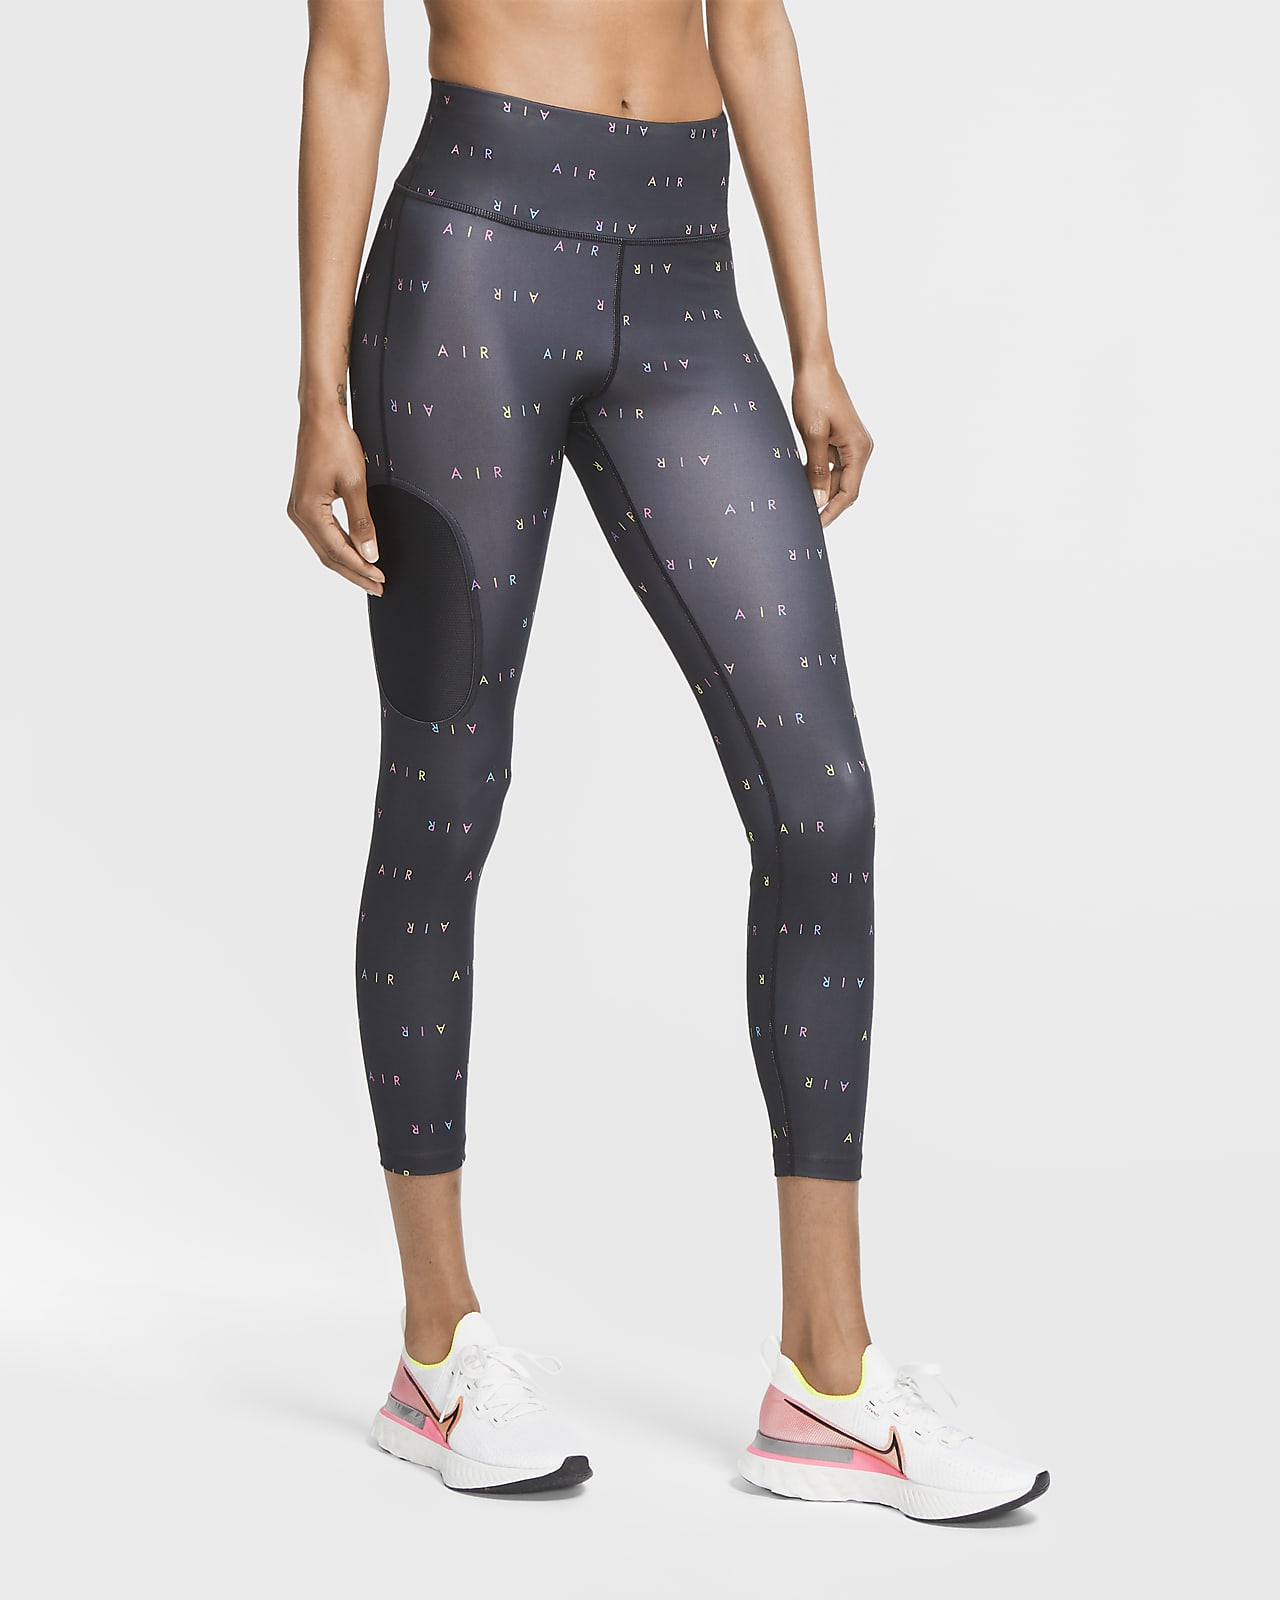 Lululemon officially has the best leggings: Our detailed ranking of 10